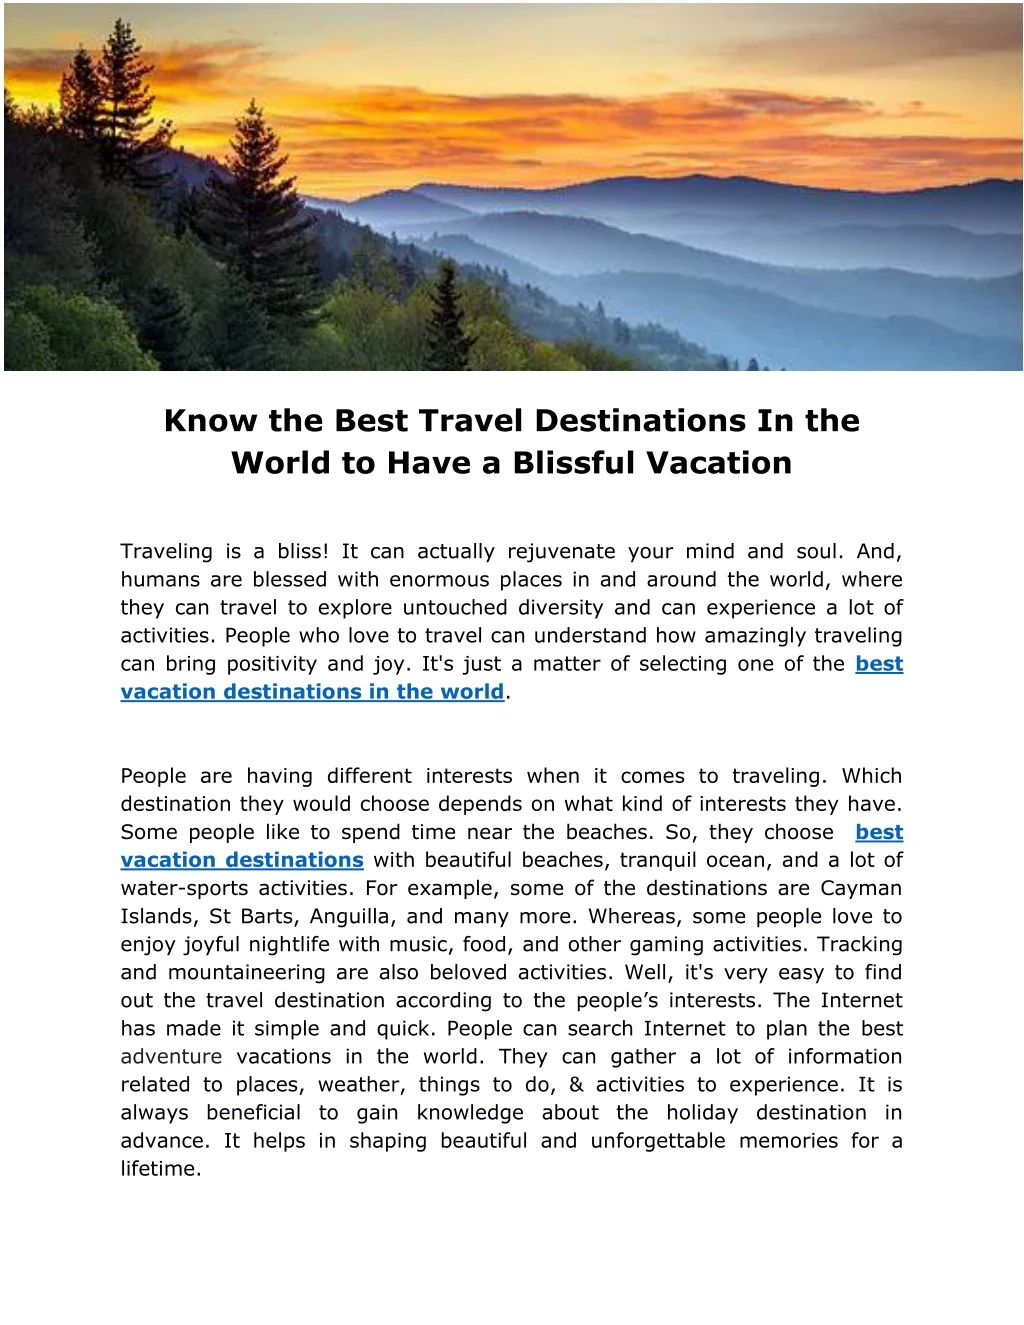 know the best travel destinations in the world